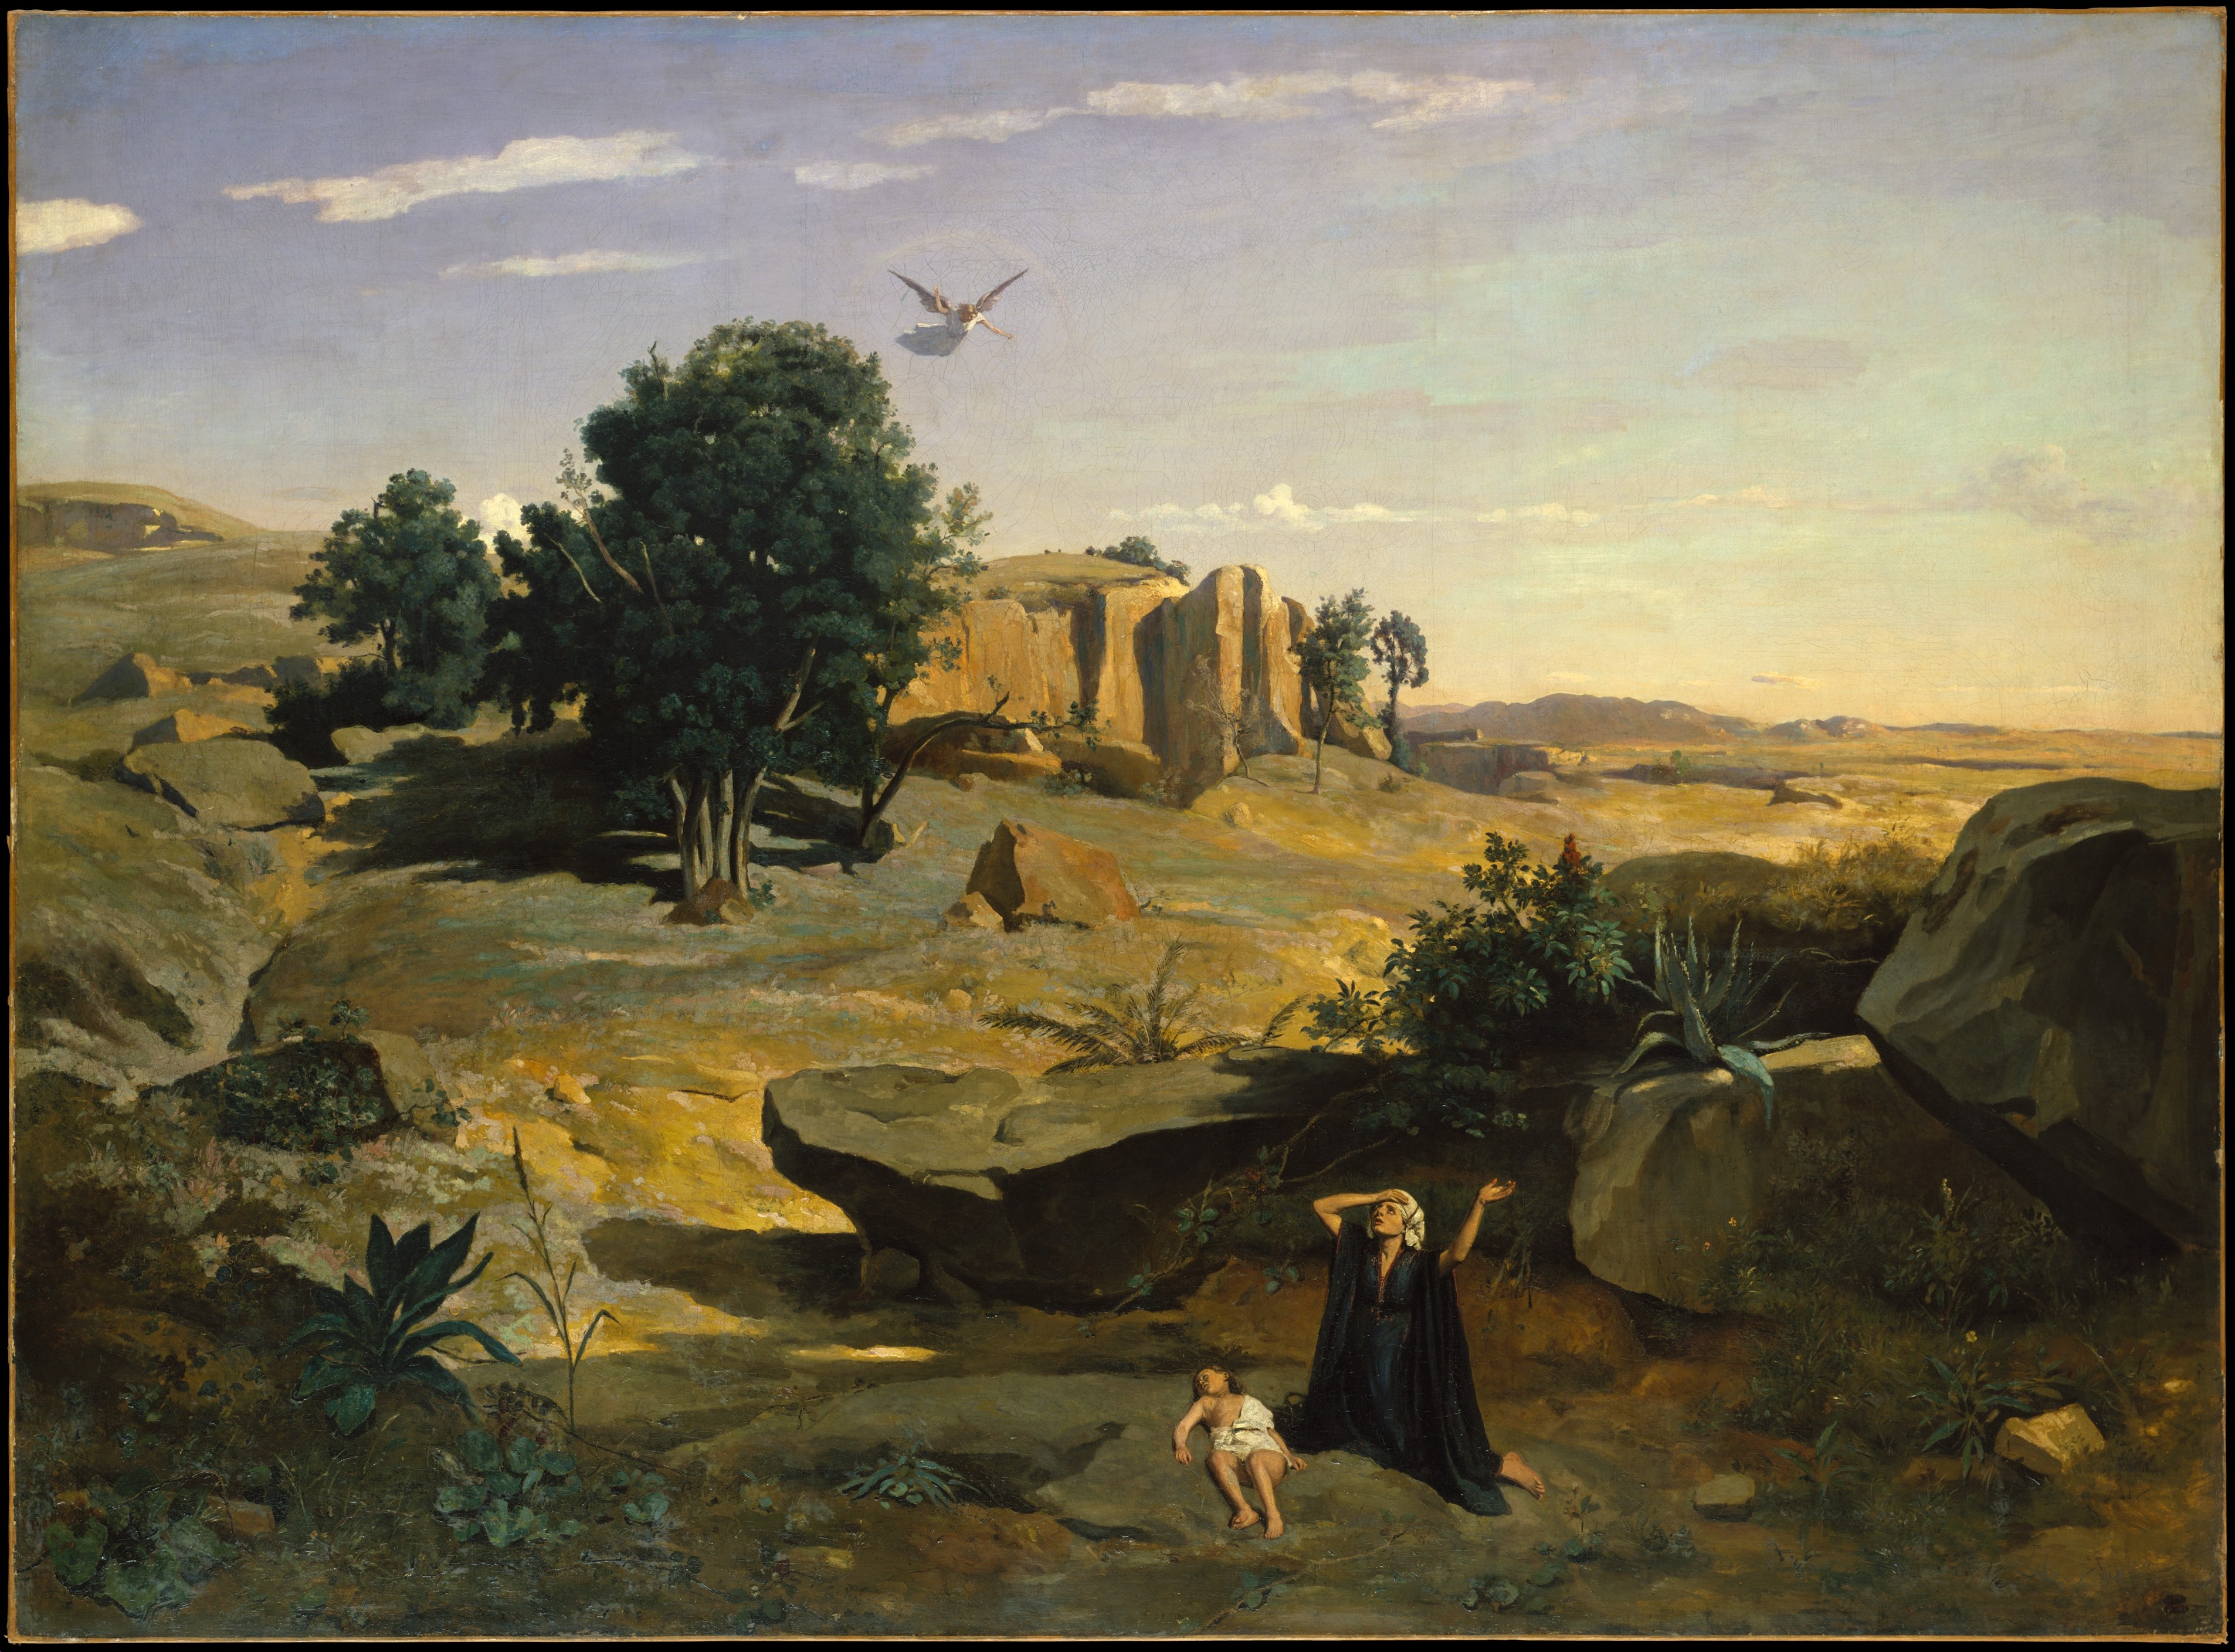 camille-corot-hagar-in-the-wilderness-1835-oil-on-canvas